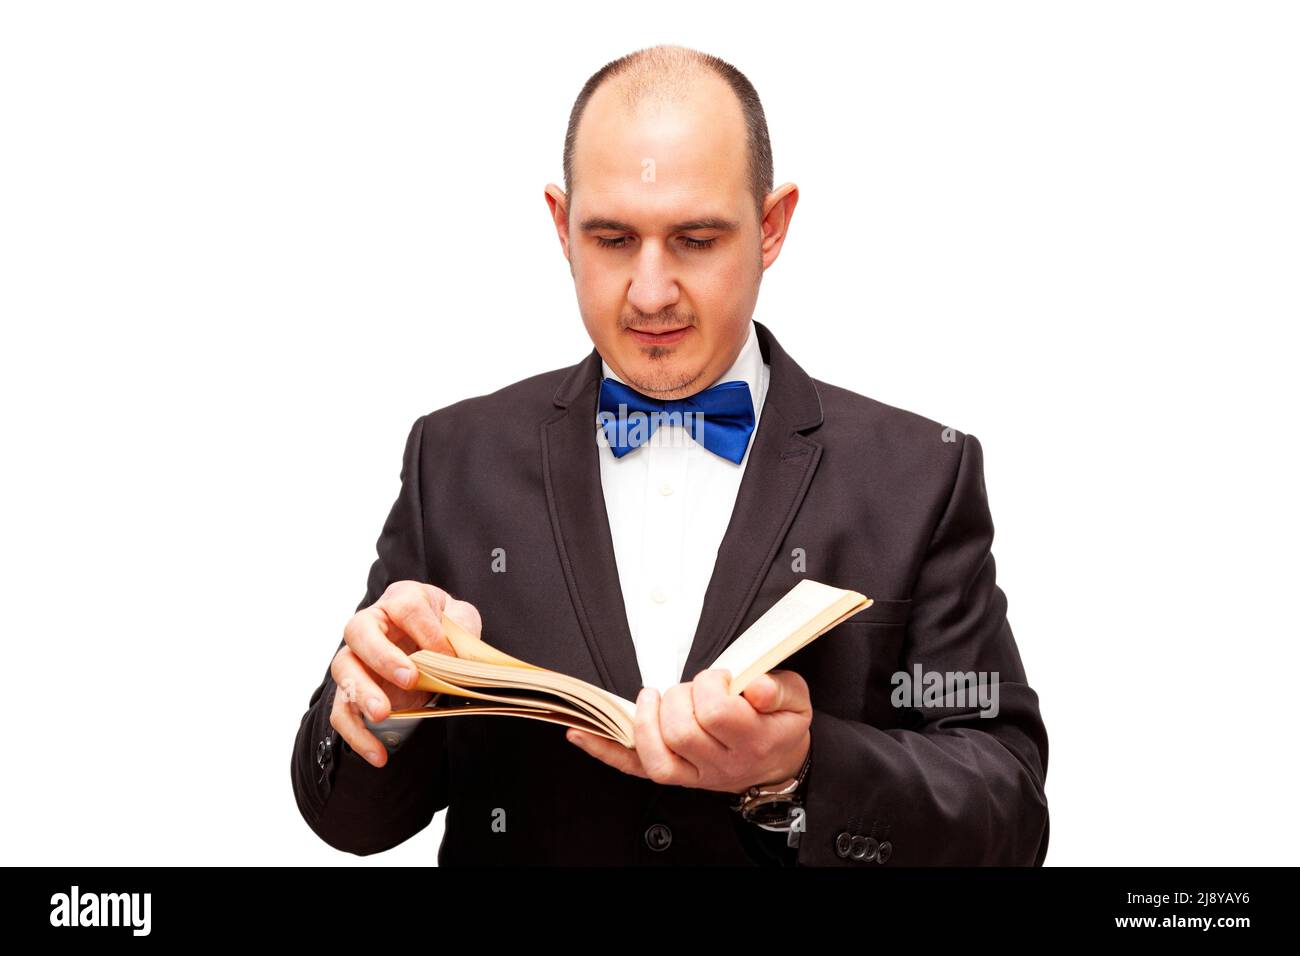 A bald Caucasian adult male dressed in a black suit, white shirt and blue bow tie is reading a book. The background is white. Stock Photo